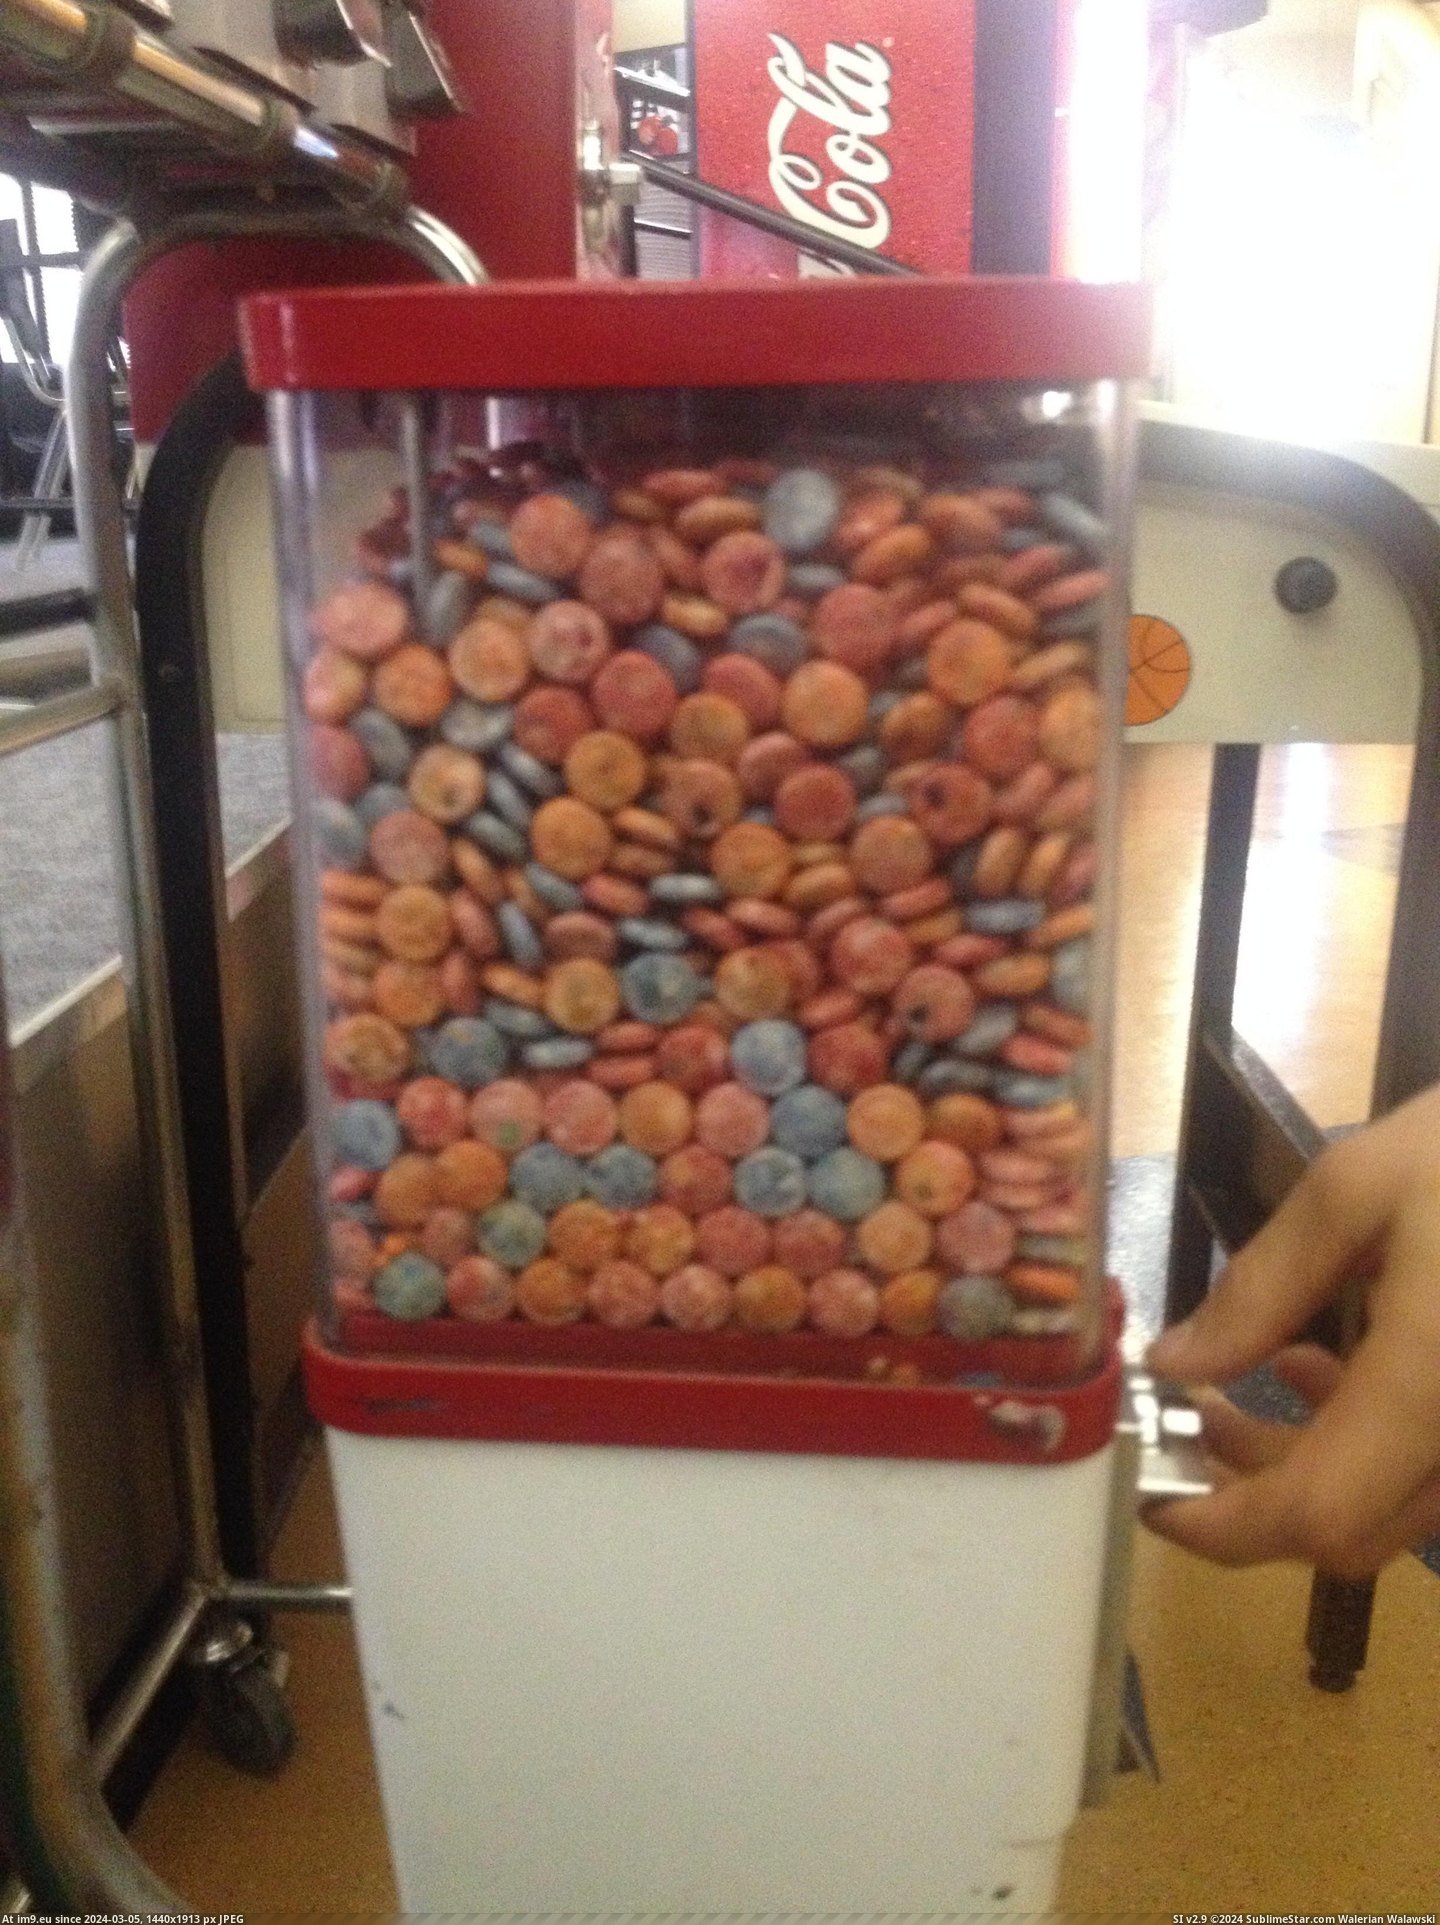 #Candy #Wall #Dispenser #Hexagonal #Formed #Formation [Mildlyinteresting] Candy formed hexagonal formation against the wall of the dispenser. Pic. (Изображение из альбом My r/MILDLYINTERESTING favs))